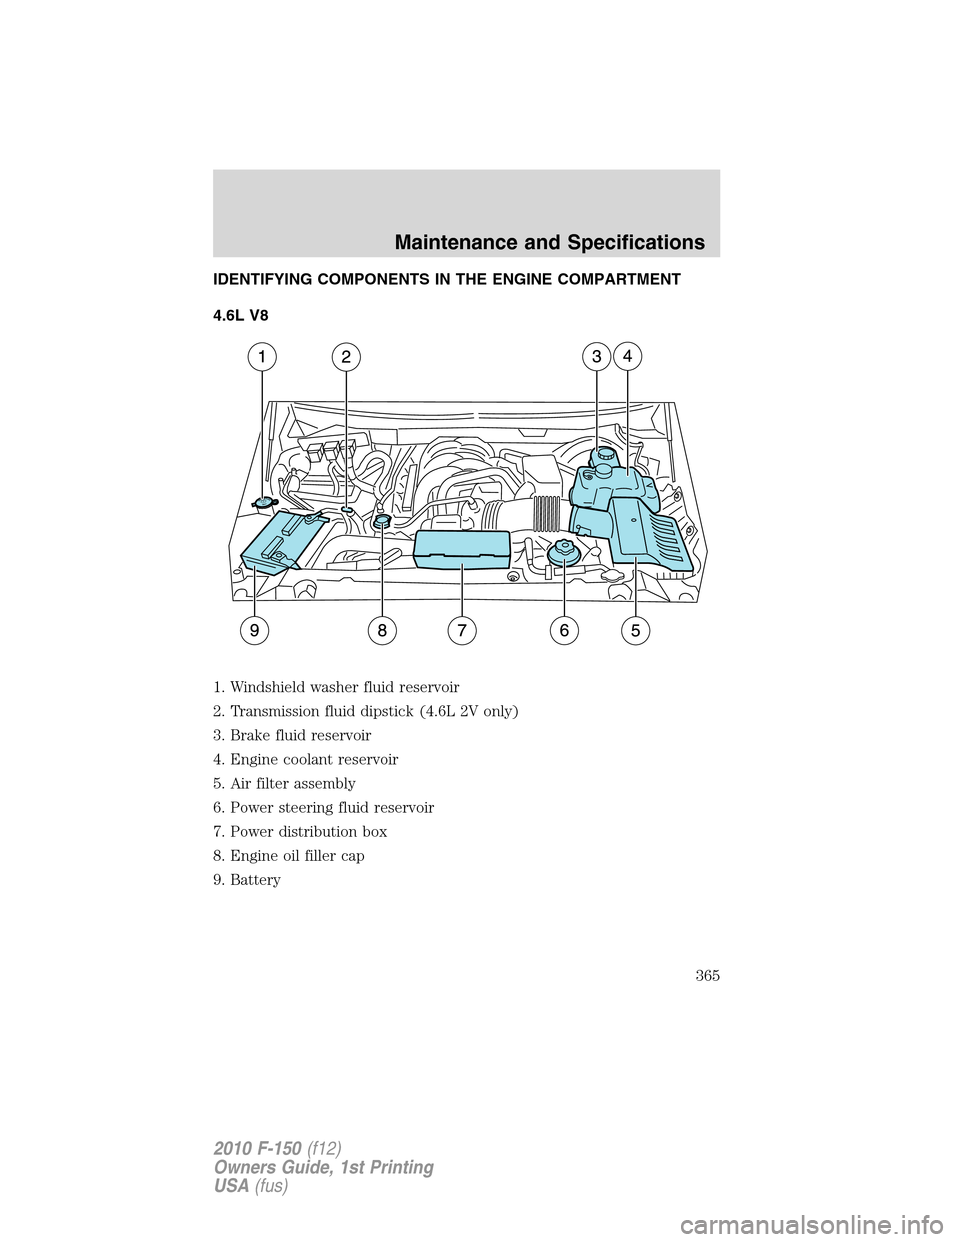 FORD F150 2010 12.G Owners Manual IDENTIFYING COMPONENTS IN THE ENGINE COMPARTMENT
4.6L V8
1. Windshield washer fluid reservoir
2. Transmission fluid dipstick (4.6L 2V only)
3. Brake fluid reservoir
4. Engine coolant reservoir
5. Air 